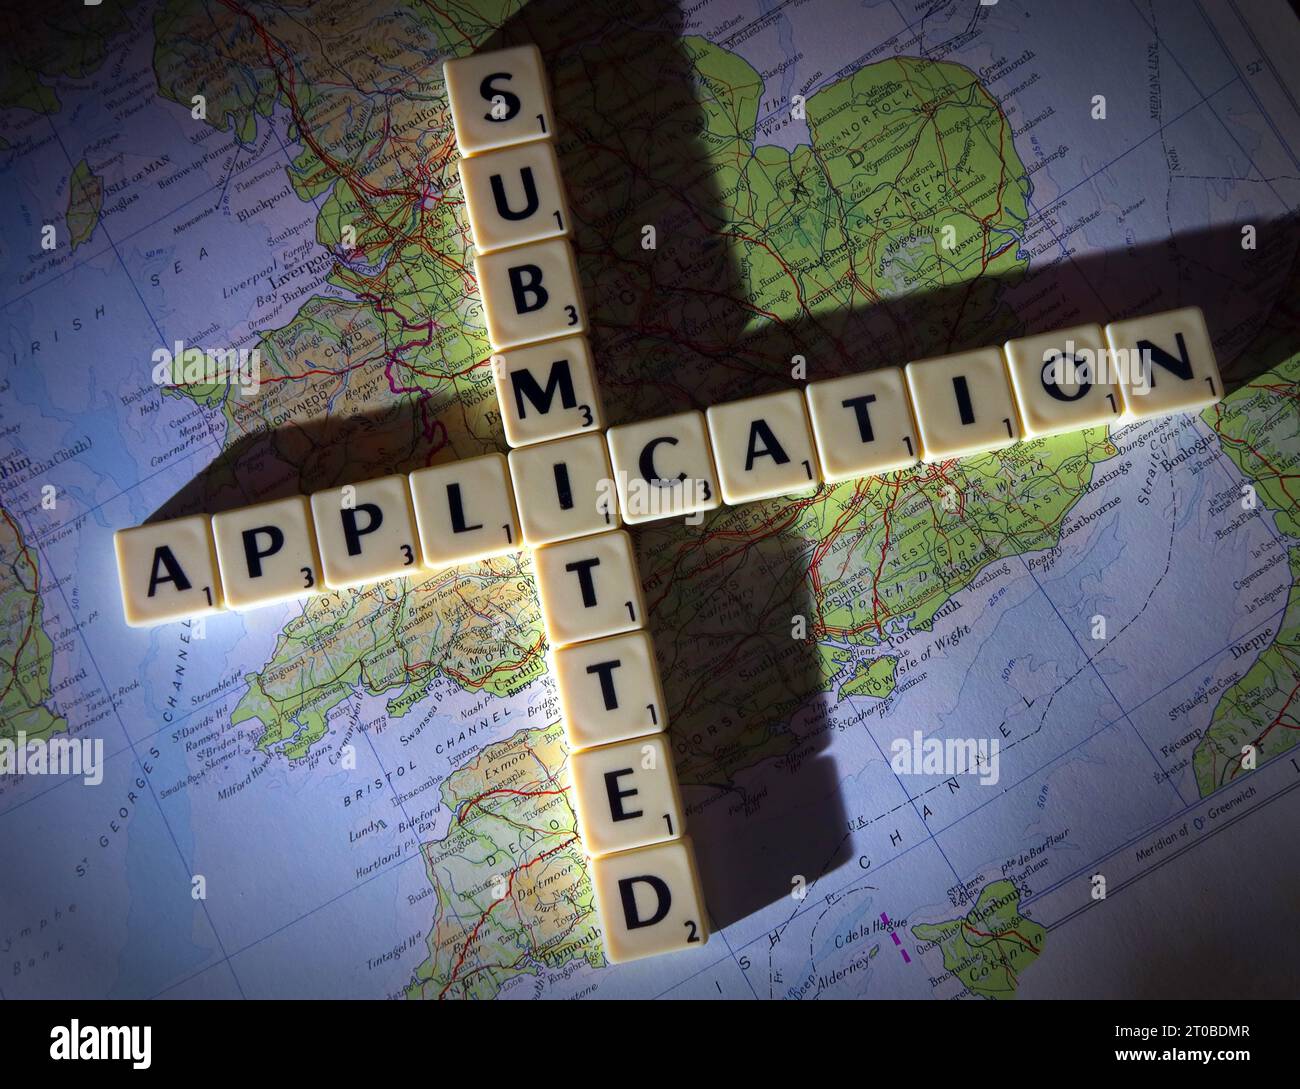 Planning Application submitted in Scrabble letters - local plans and councils Stock Photo